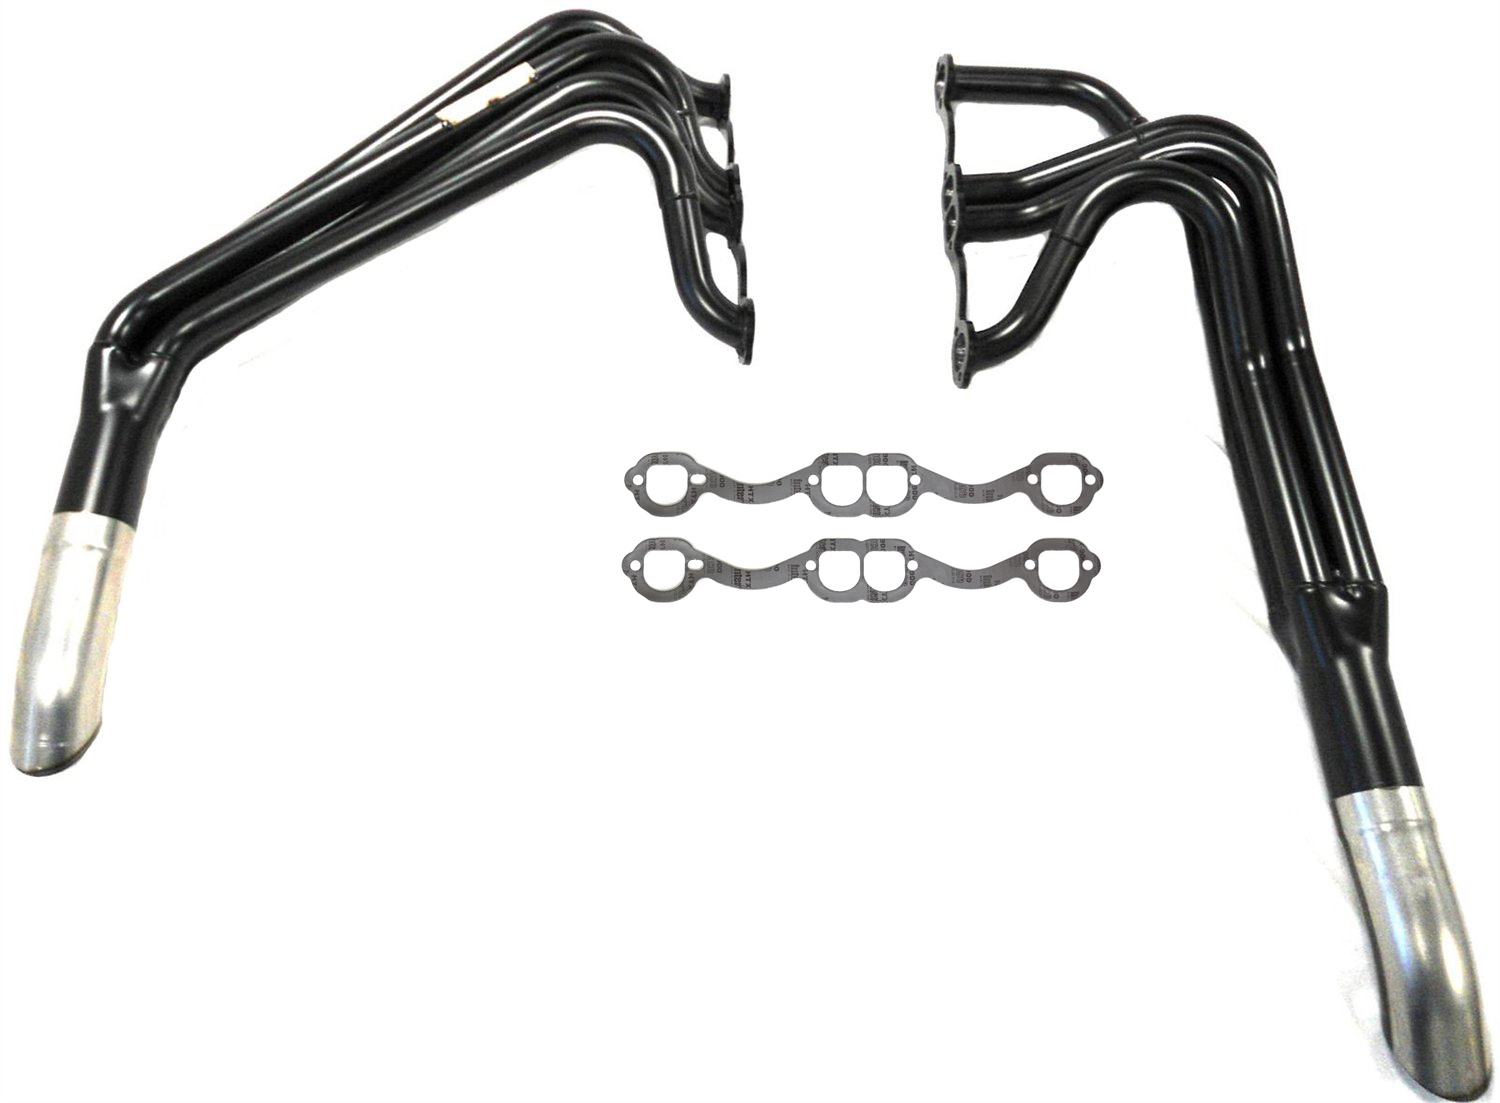 Beyea Headers IDM-604-S1-C - Headers, IMCA-UMP Modified, 1-5/8 to 1-3/4 in Primary, 3 in Collector, Steel, Black Paint, Small Block Chevy, Kit